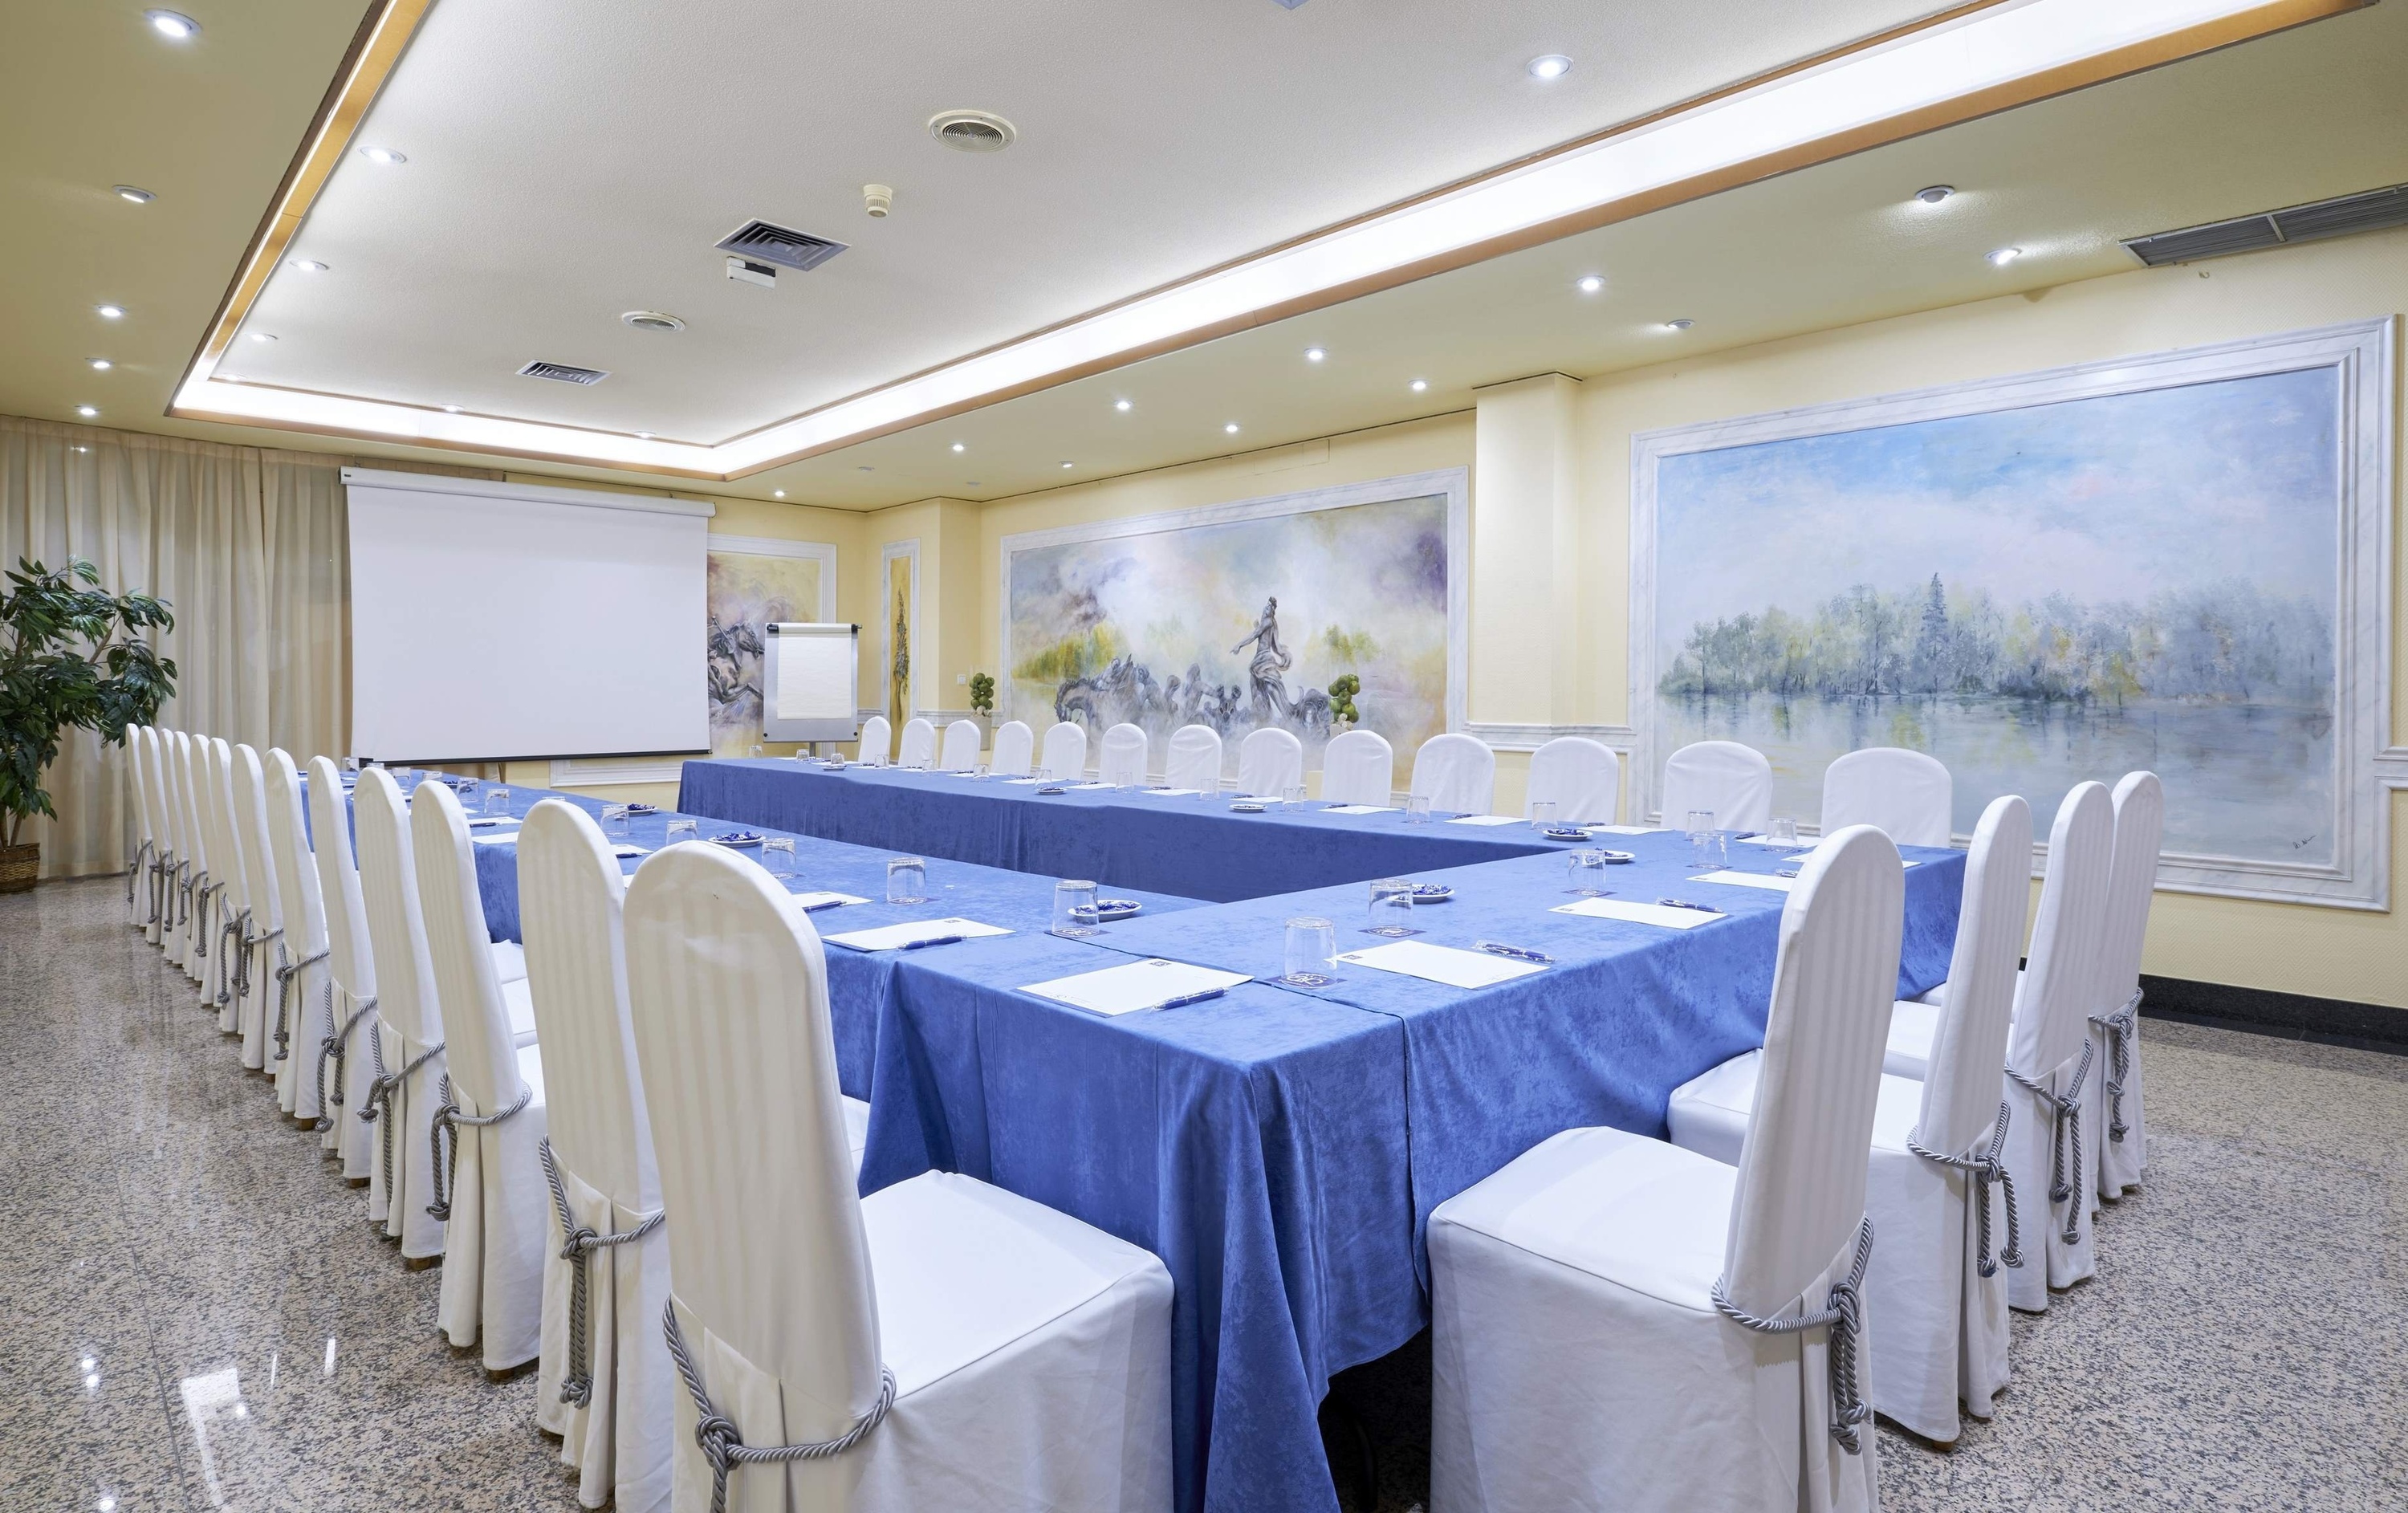 a conference room with tables and chairs and a projector screen